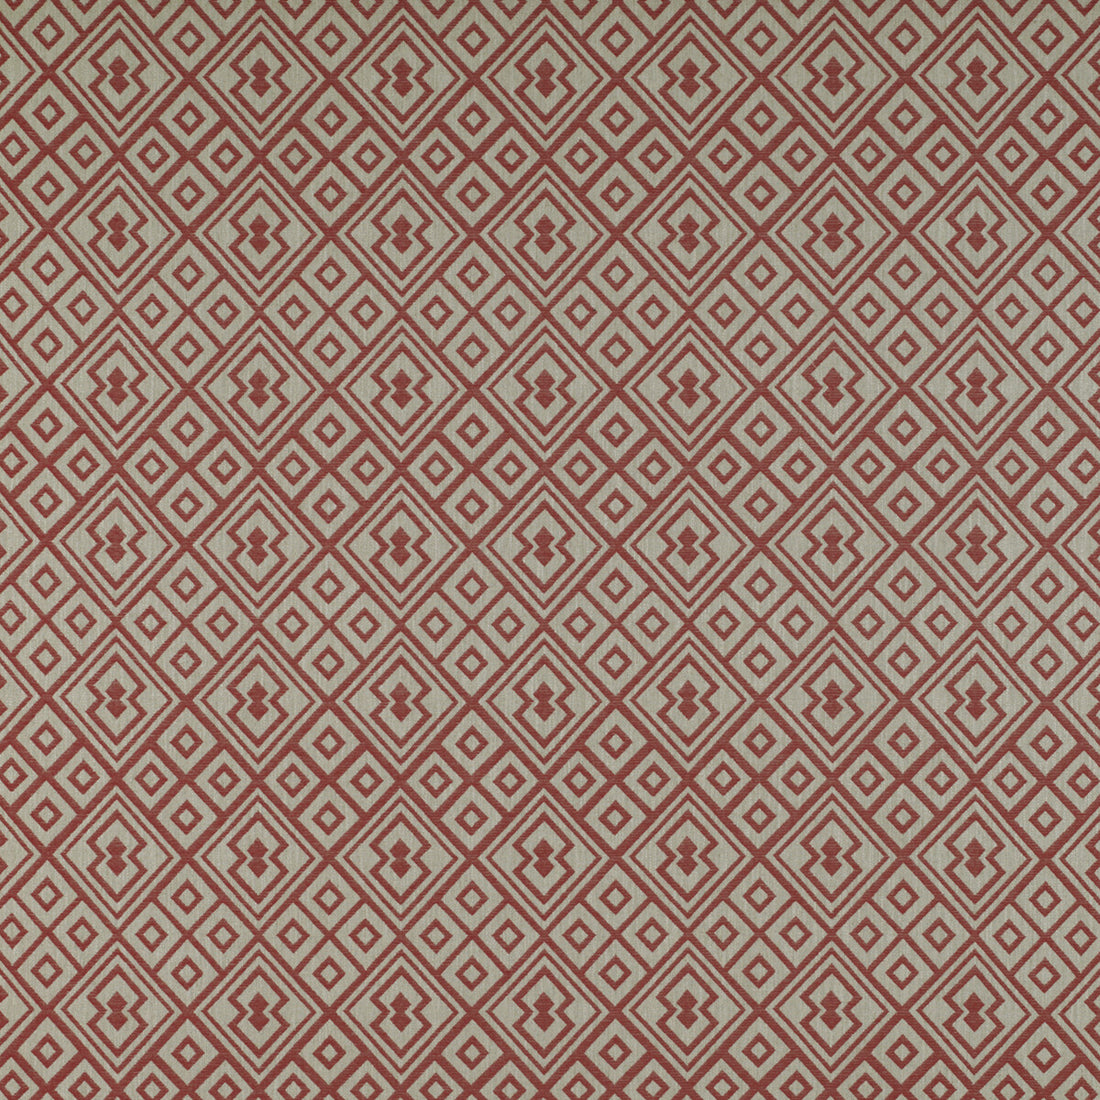 Bergamo fabric in rojo color - pattern GDT5325.004.0 - by Gaston y Daniela in the Tierras collection